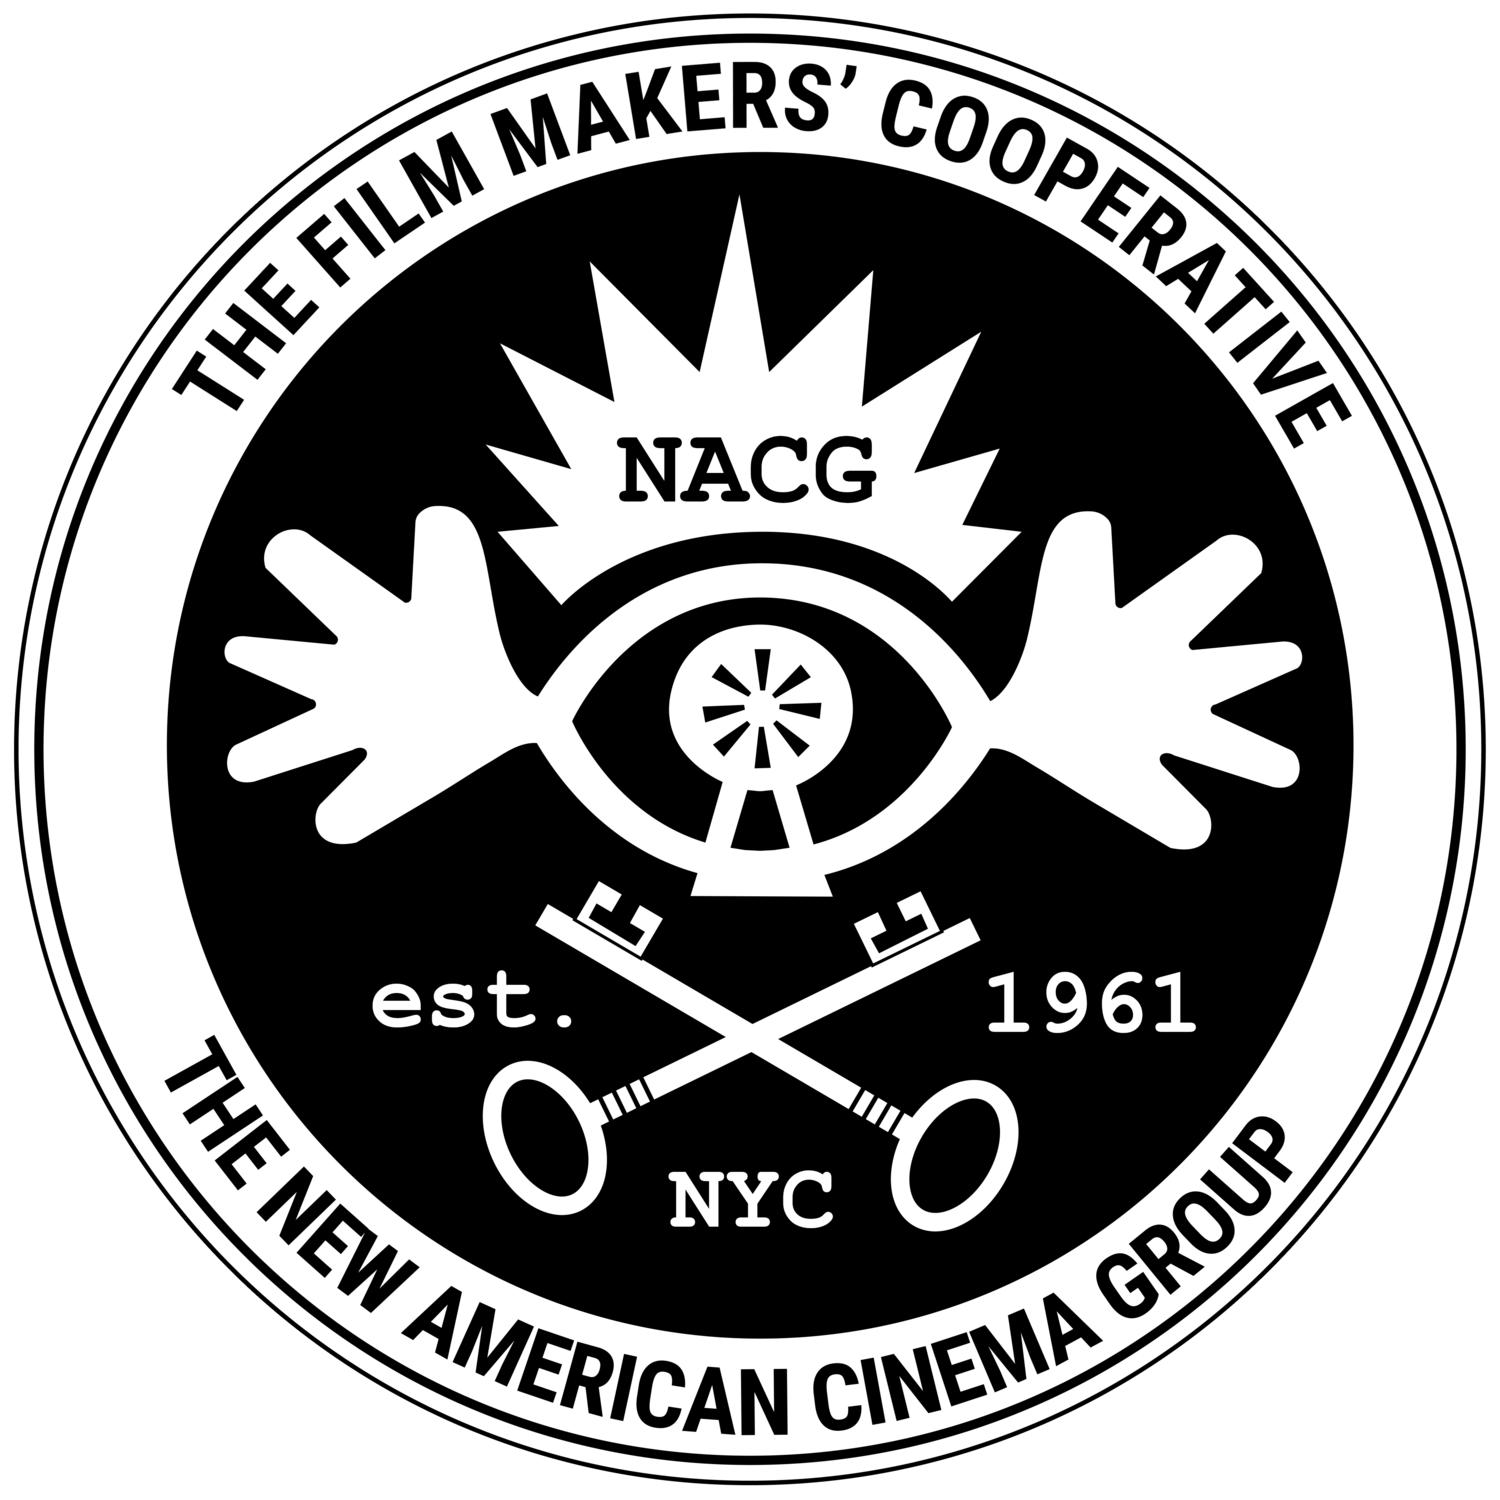 Sign Up For Our New Membership Program for NON-FILMMAKERS!